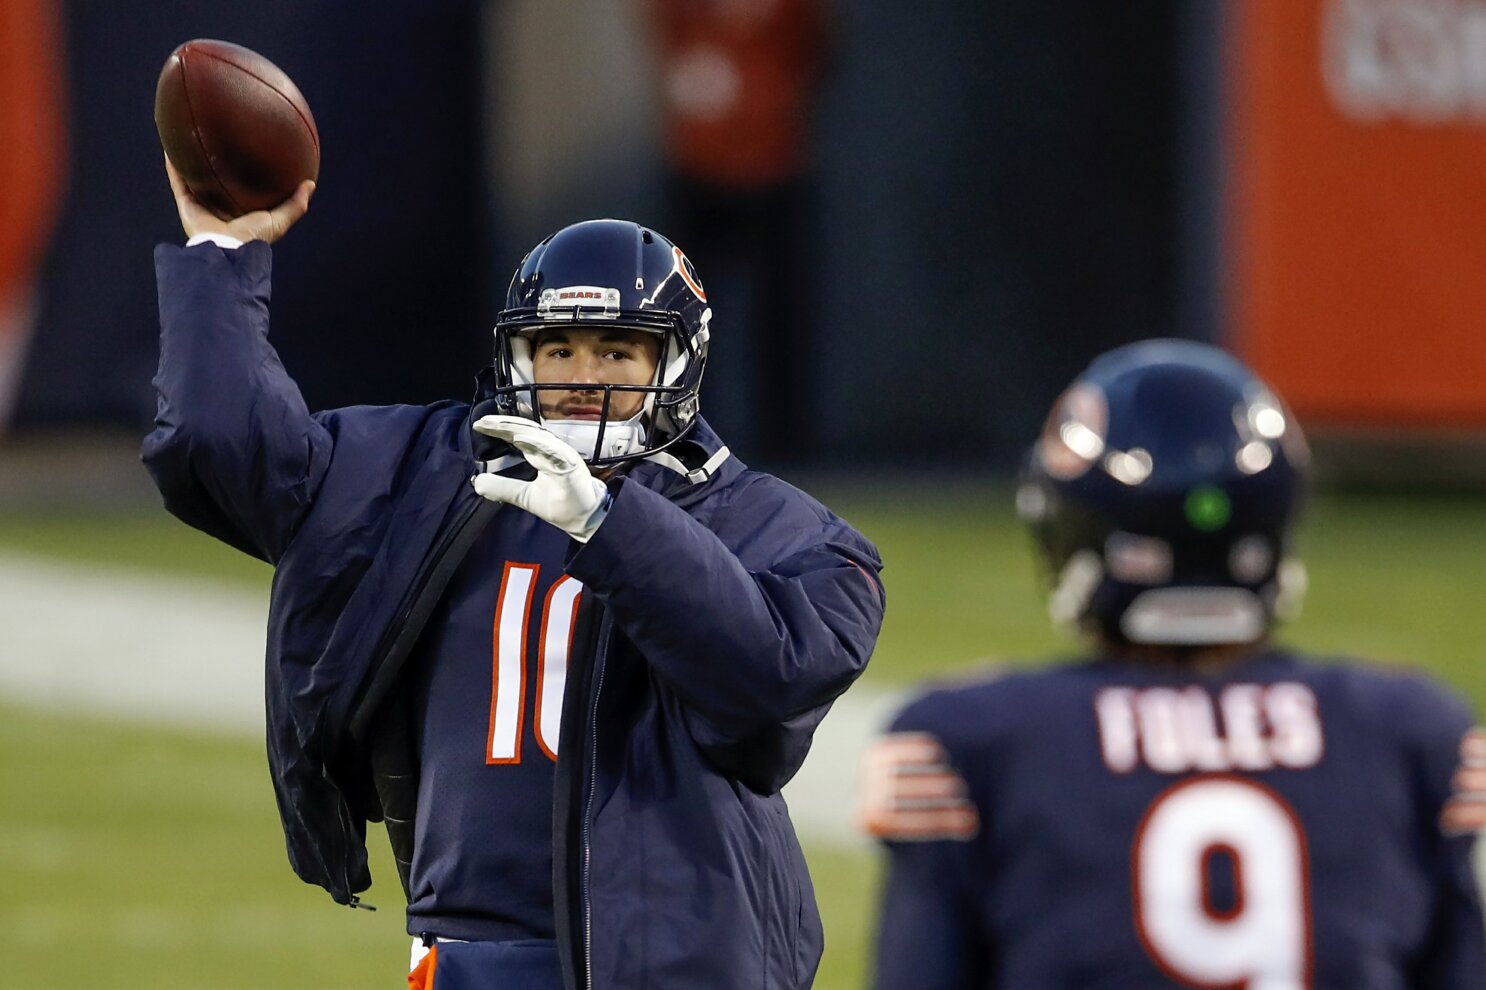 Mitch Trubisky: Ranking the QB's starts with Chicago Bears